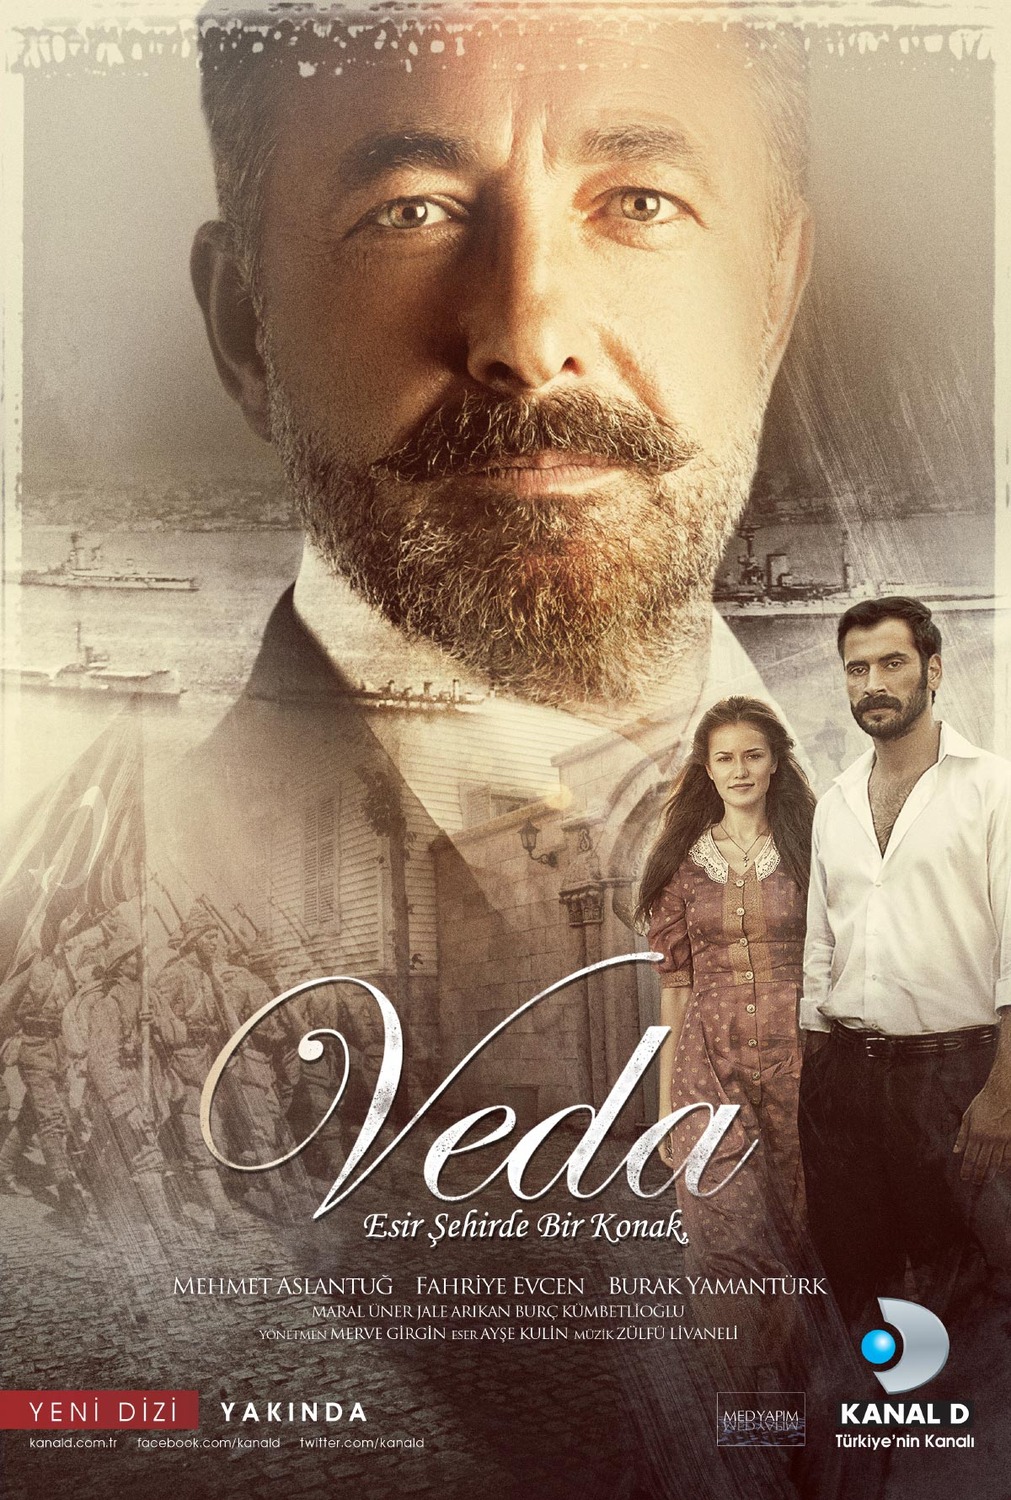 Extra Large TV Poster Image for Veda 